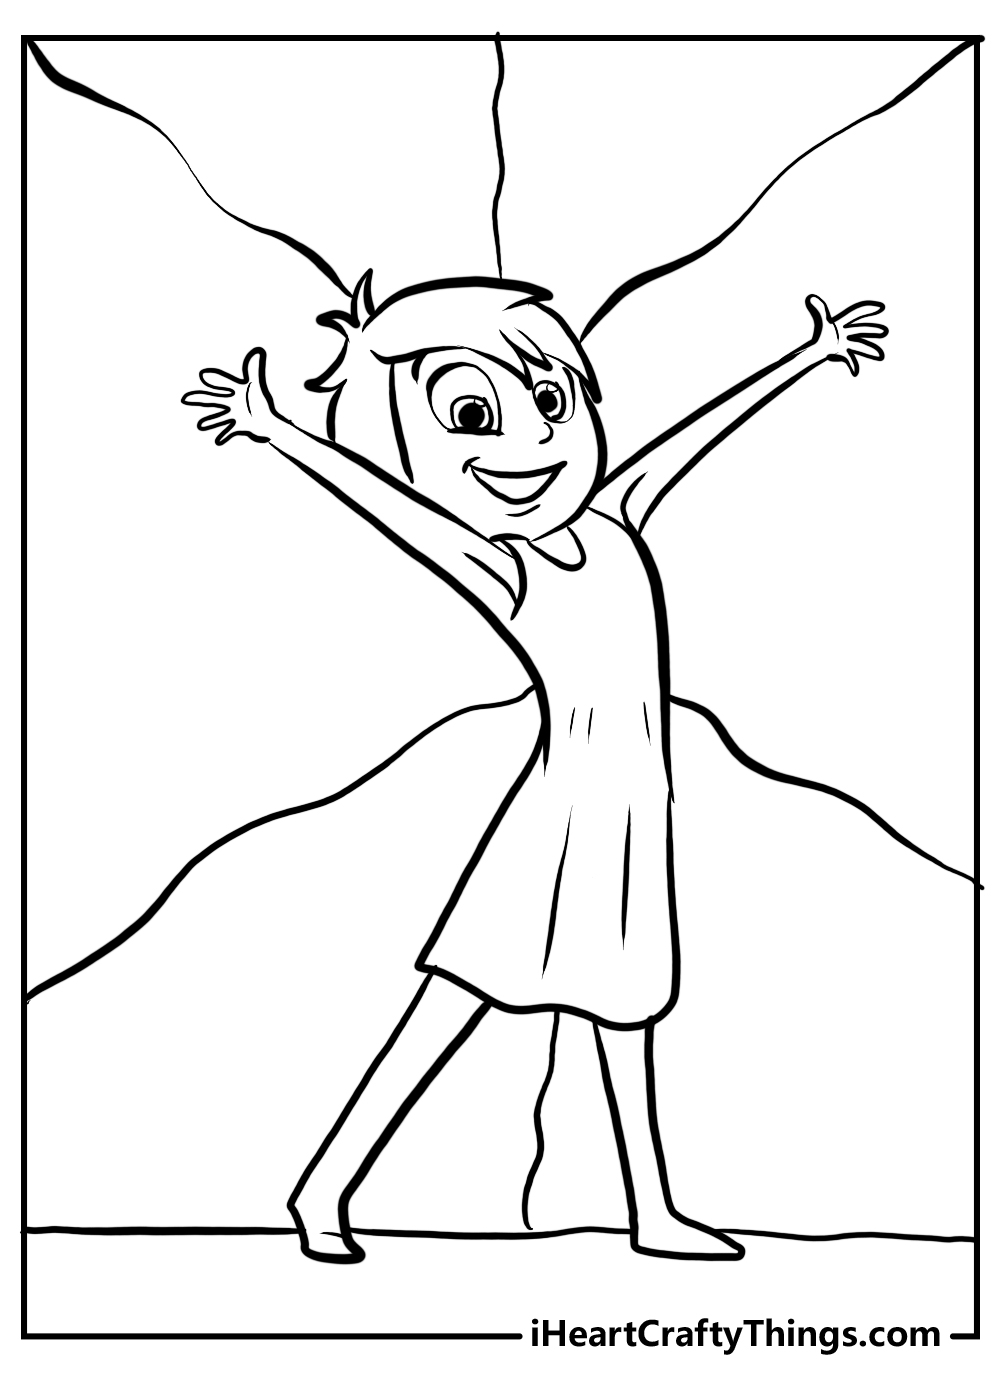 inside out coloring sheet free download